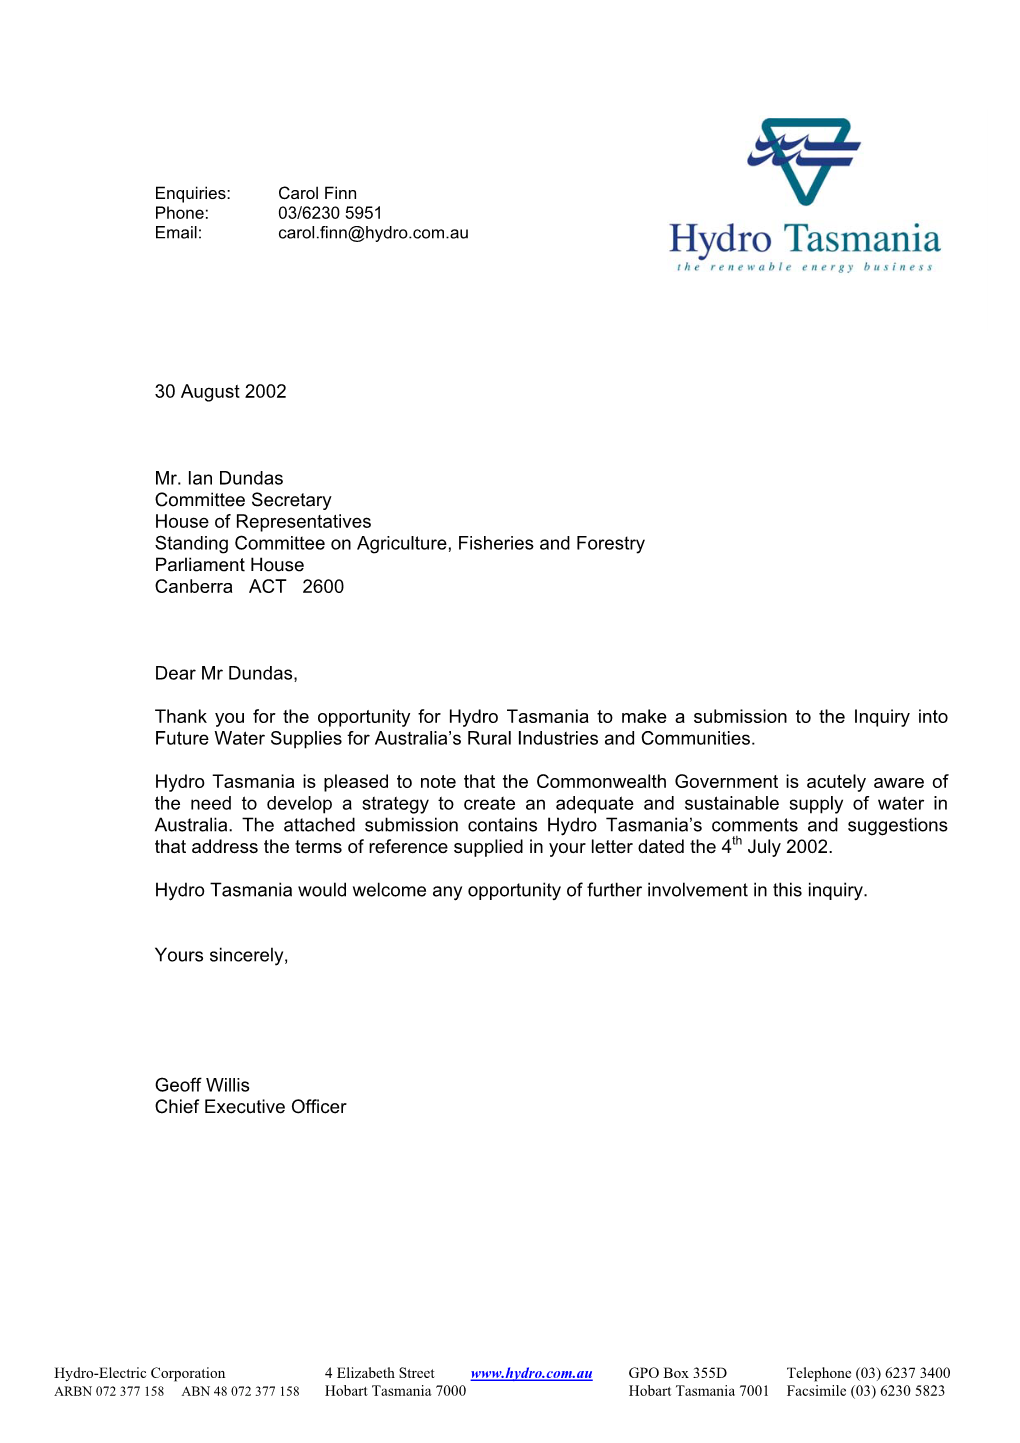 Hydro Tasmania to Make a Submission to the Inquiry Into Future Water Supplies for Australia’S Rural Industries and Communities